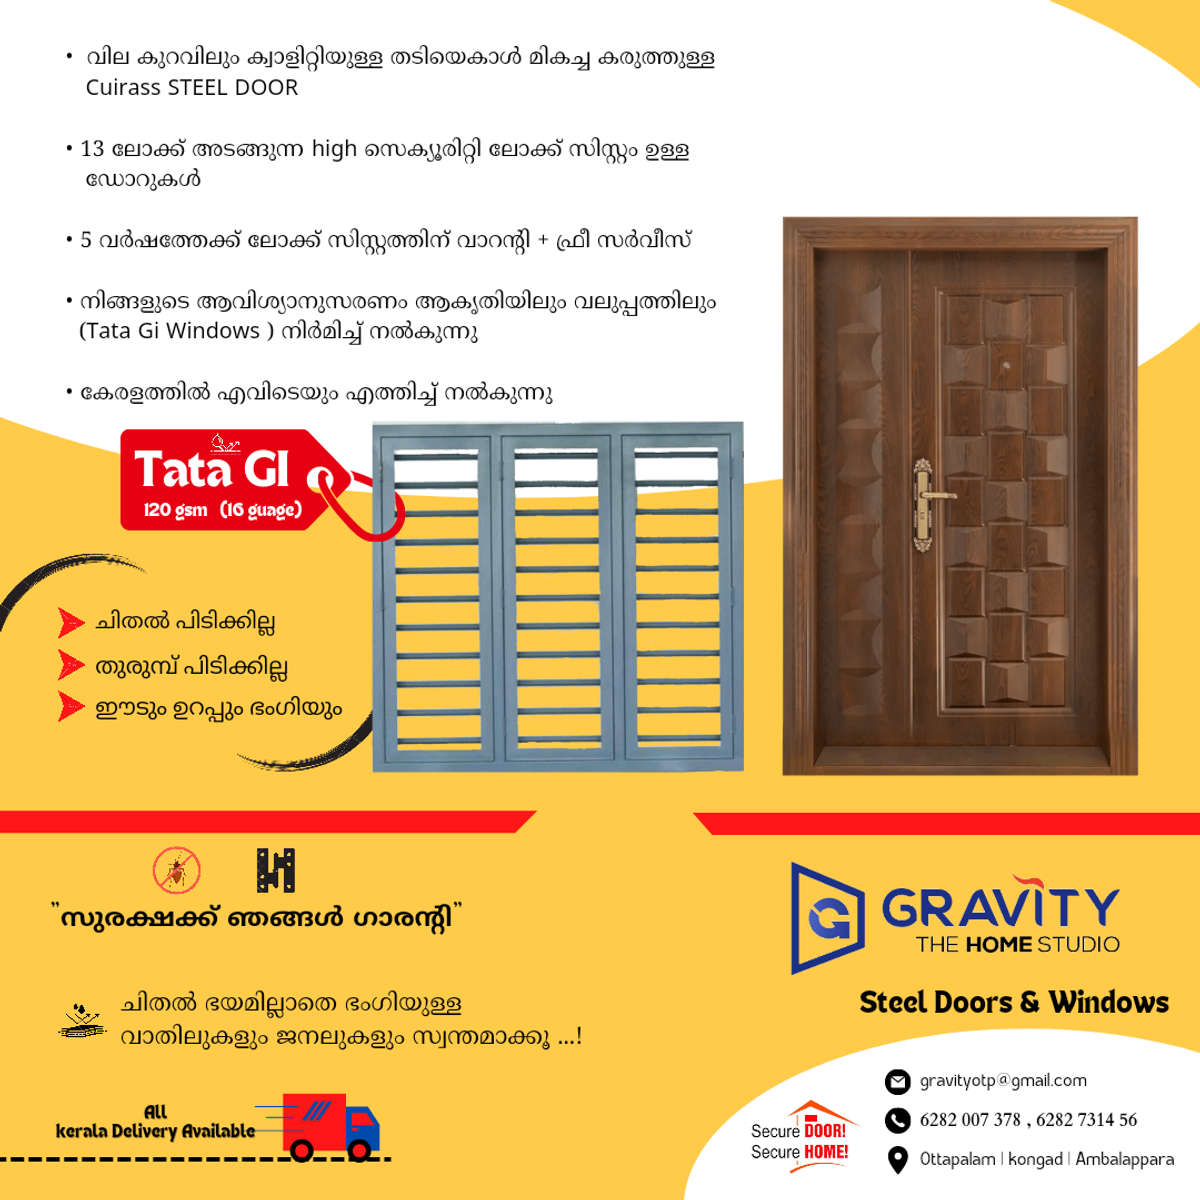 Designs by Building Supplies GRAVITY The Home Studio, Palakkad | Kolo